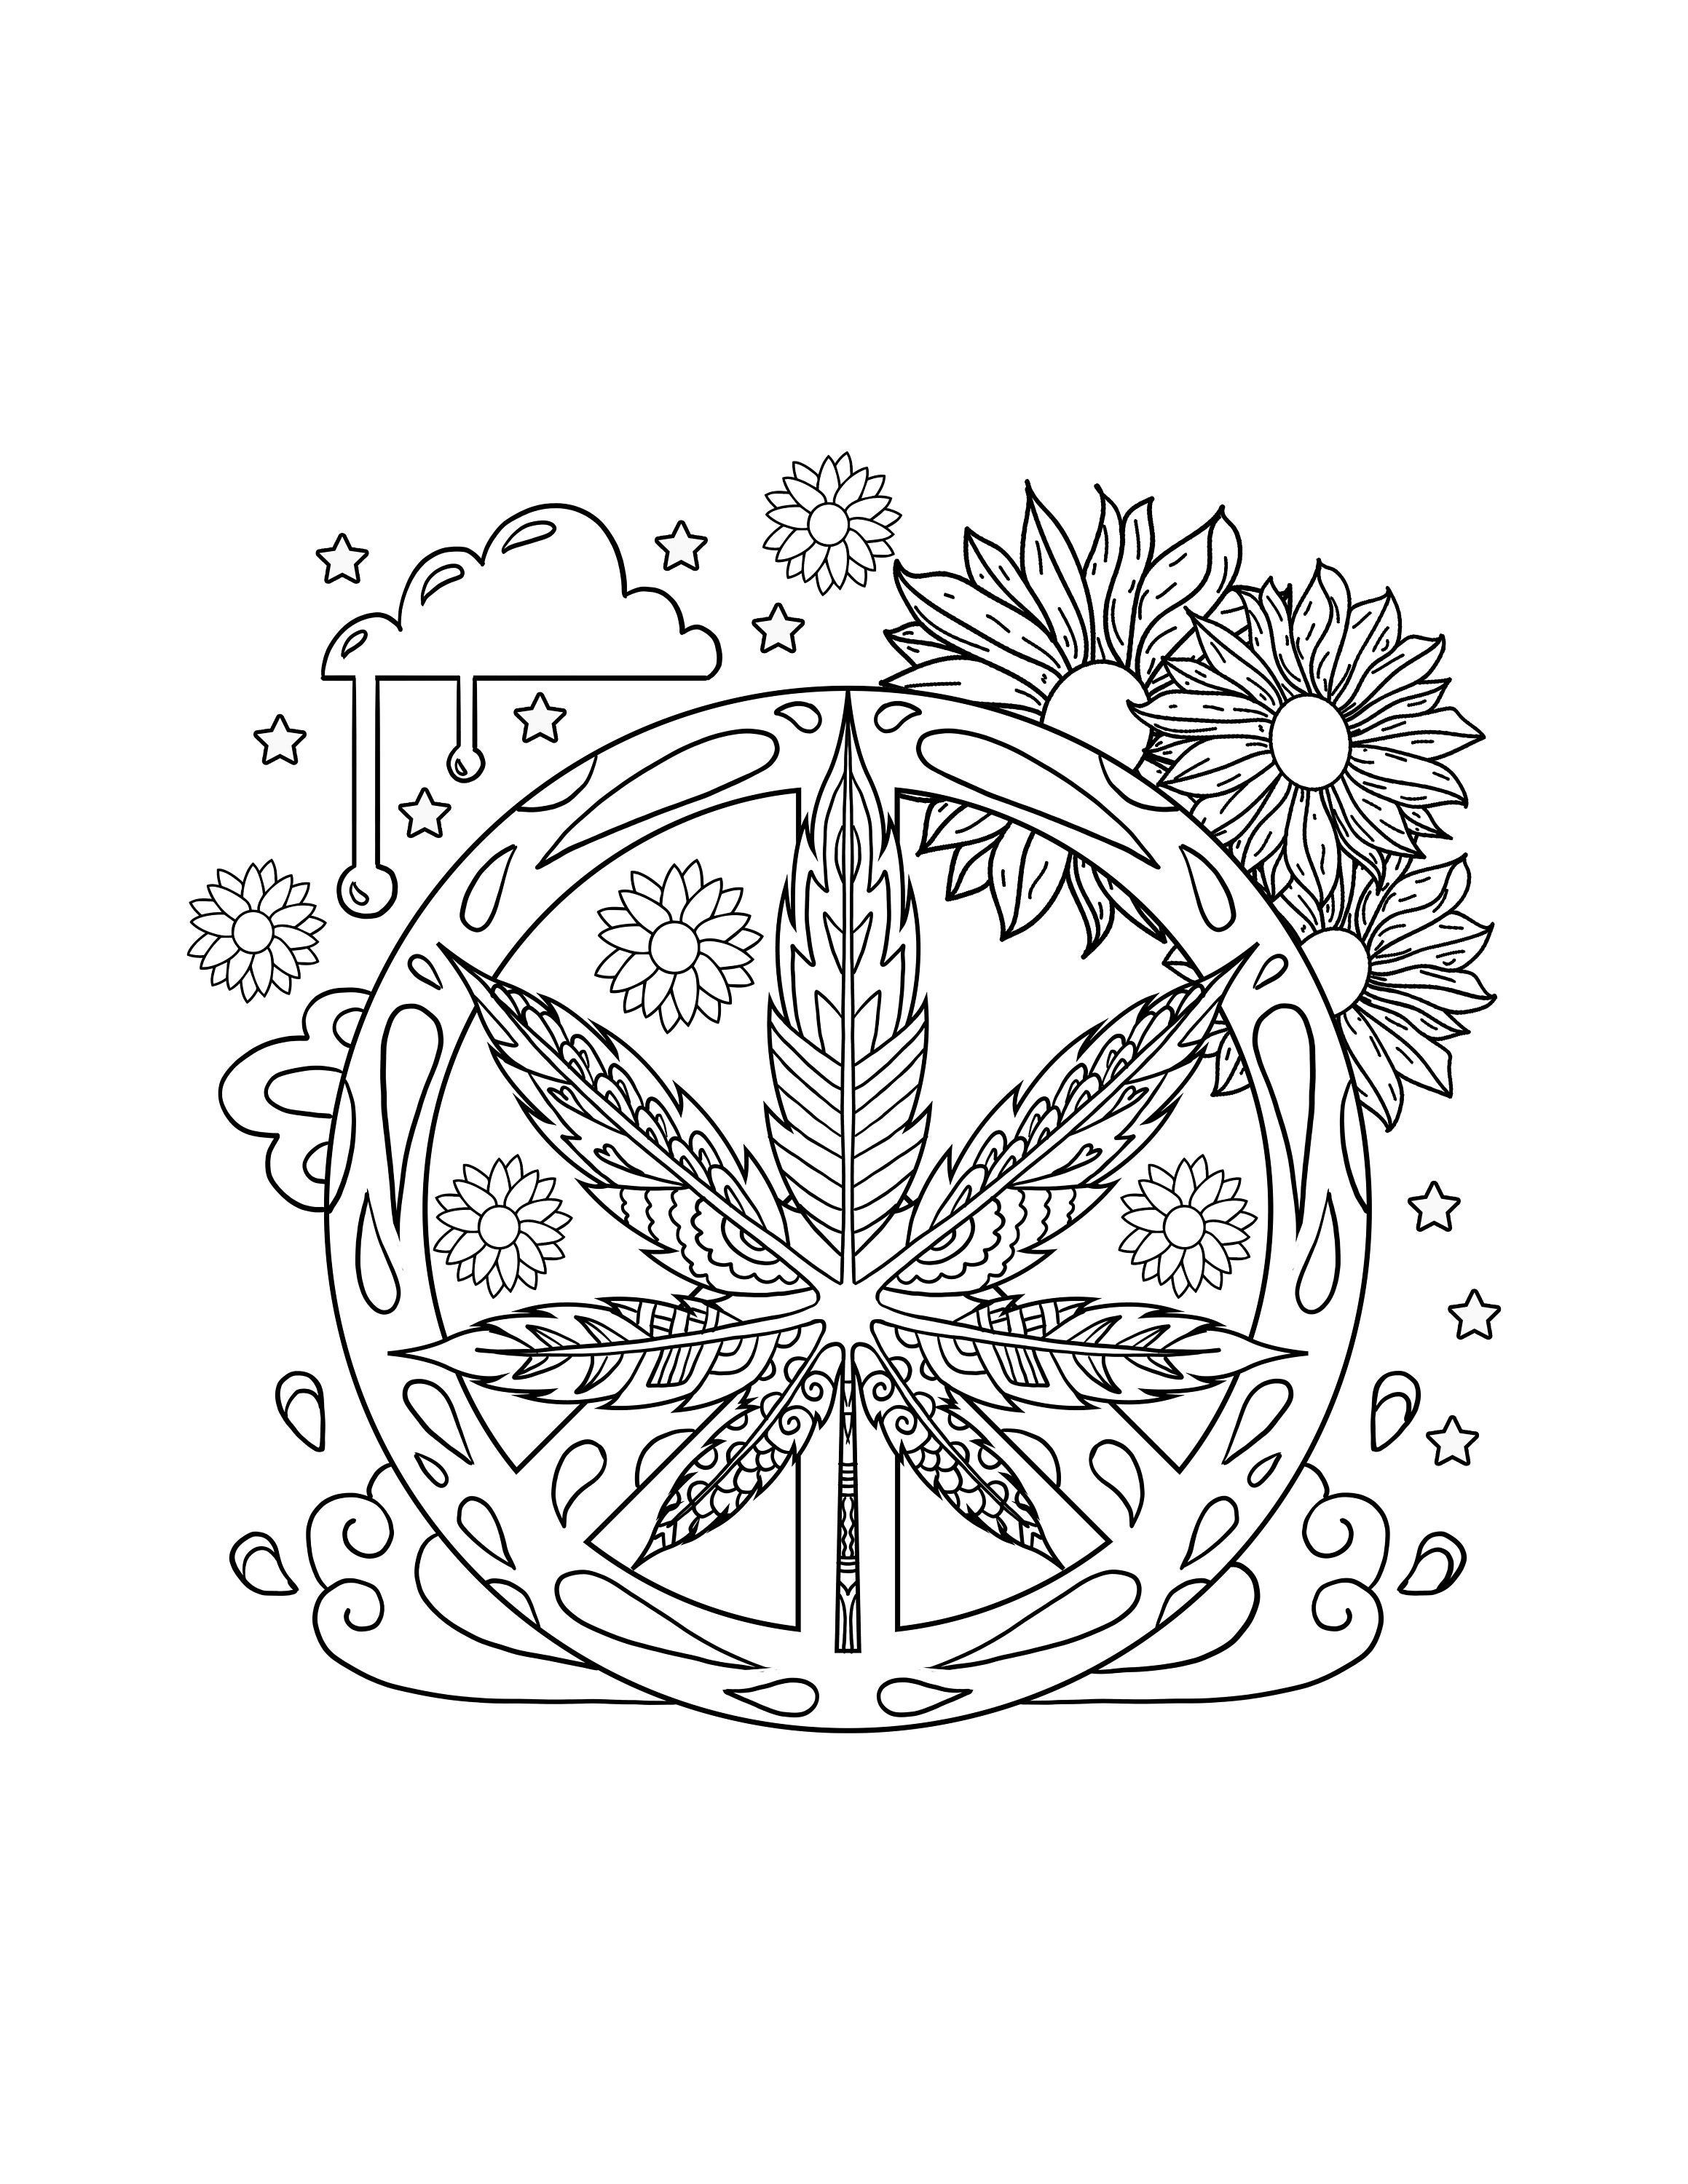 Unleash Your Inner Artist: Weed Adult Coloring Pages for a Relaxing Time